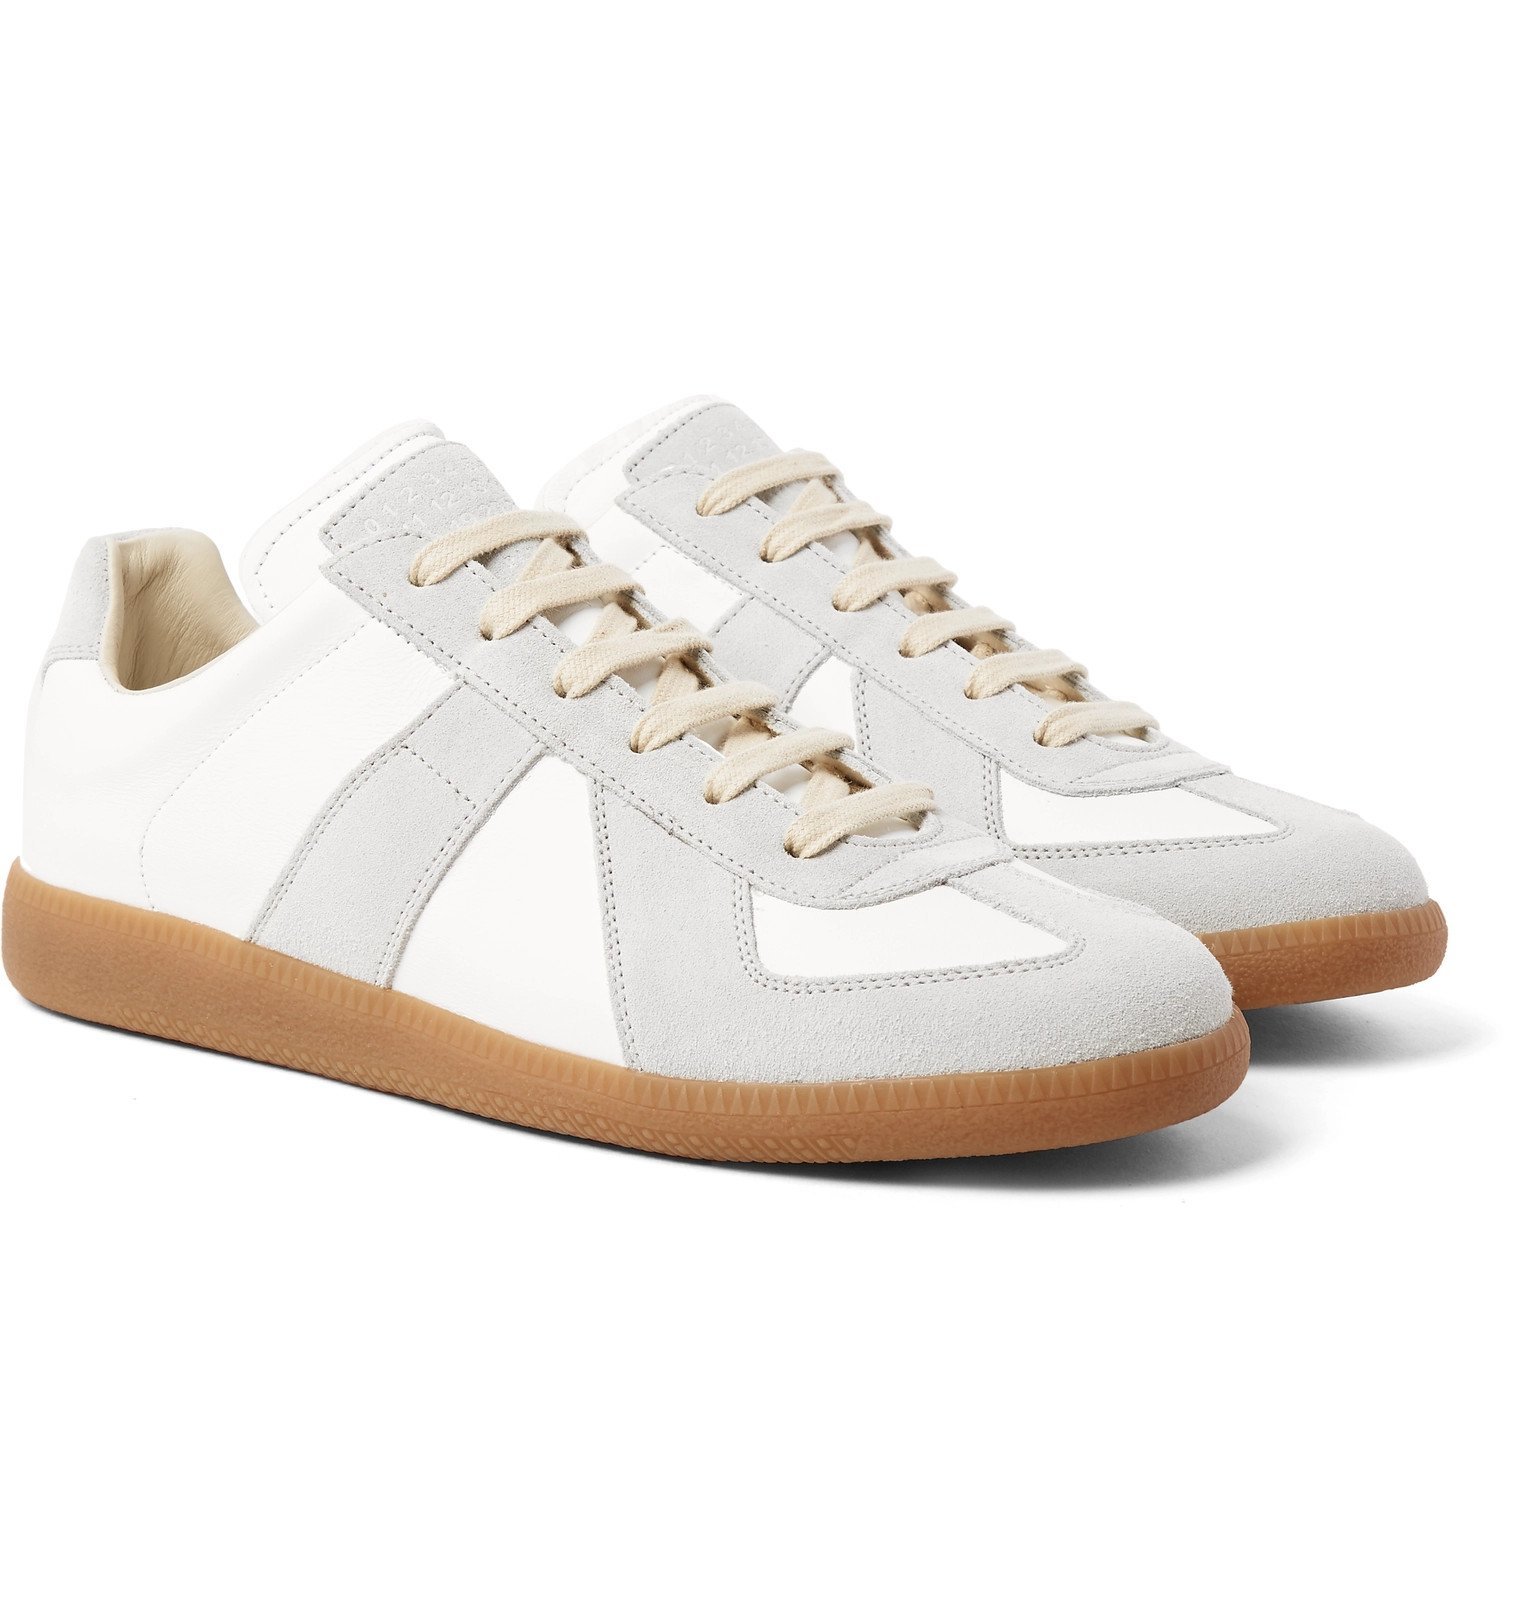 Maison Margiela - Replica Leather and Suede Sneakers - White Maison ...